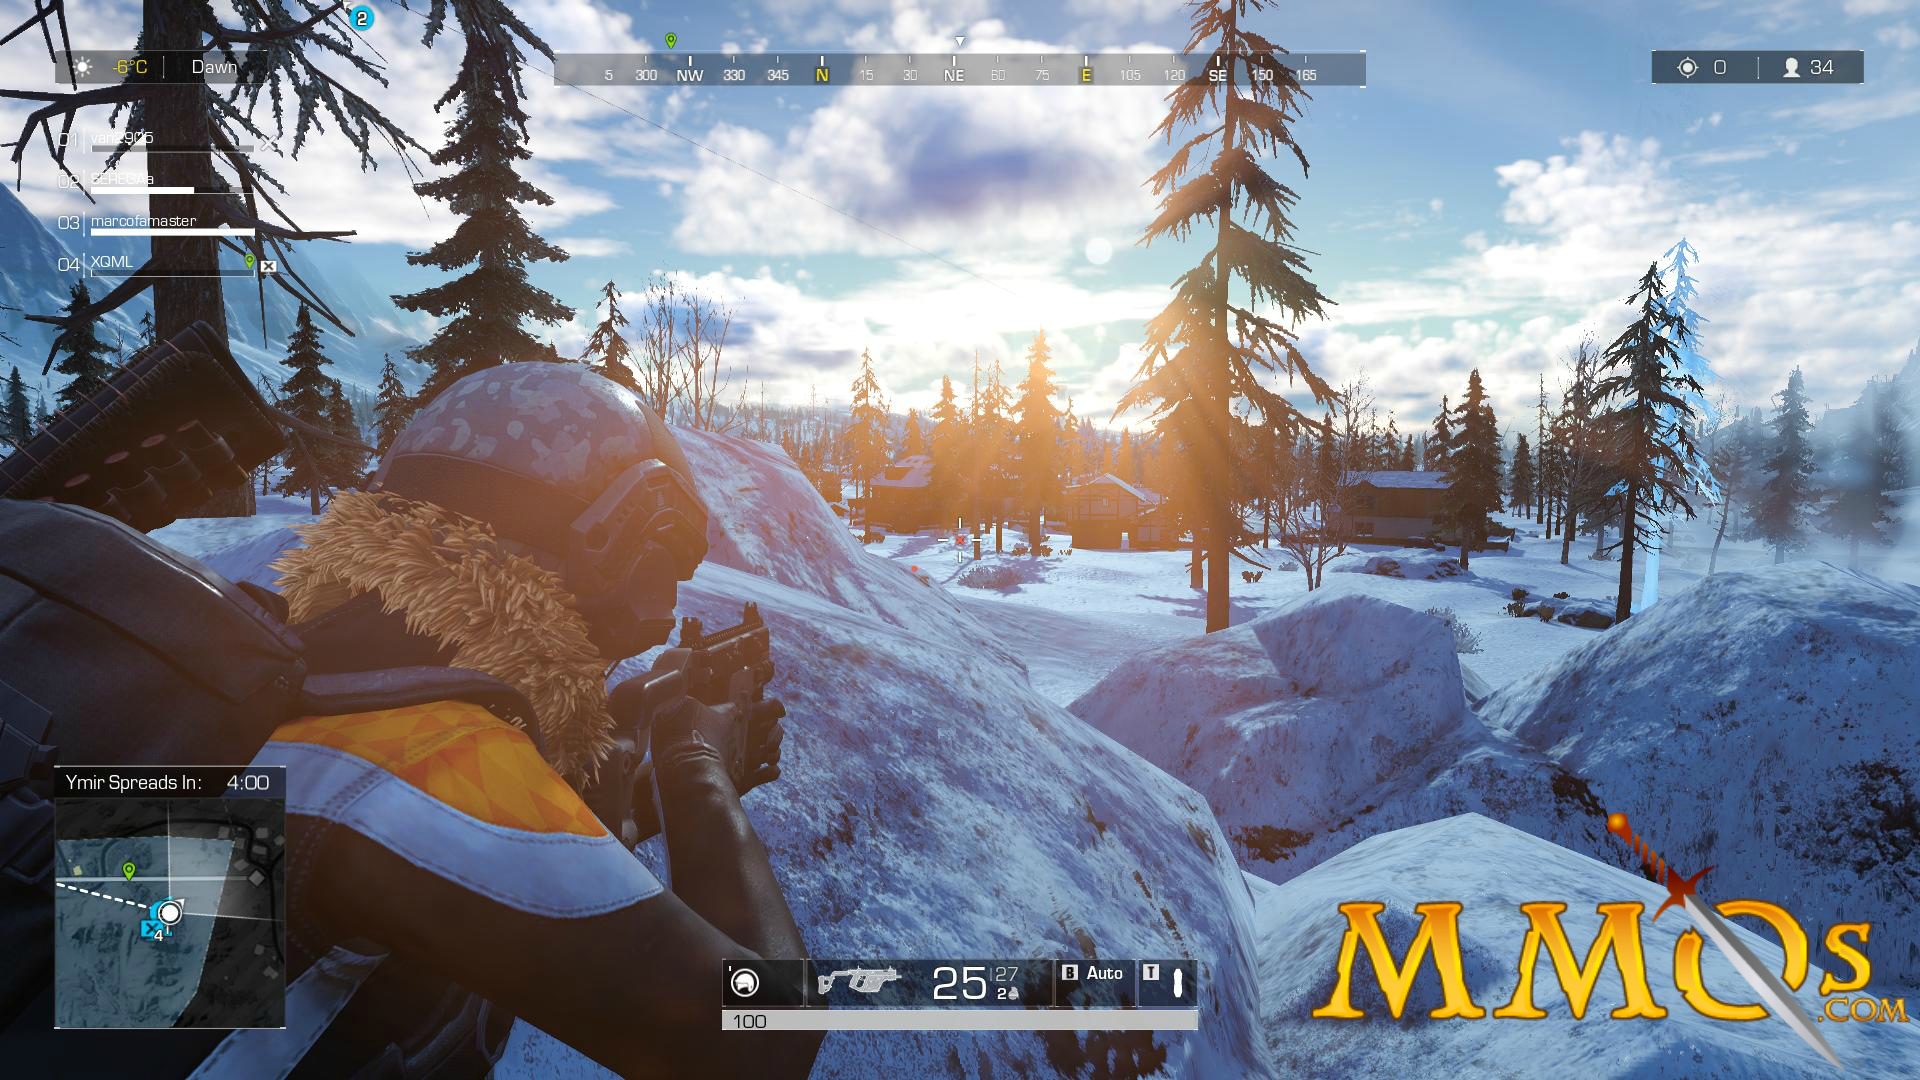 Ring of Elysium is one of the few PC games that now supports DirectX 12 on Windows  7